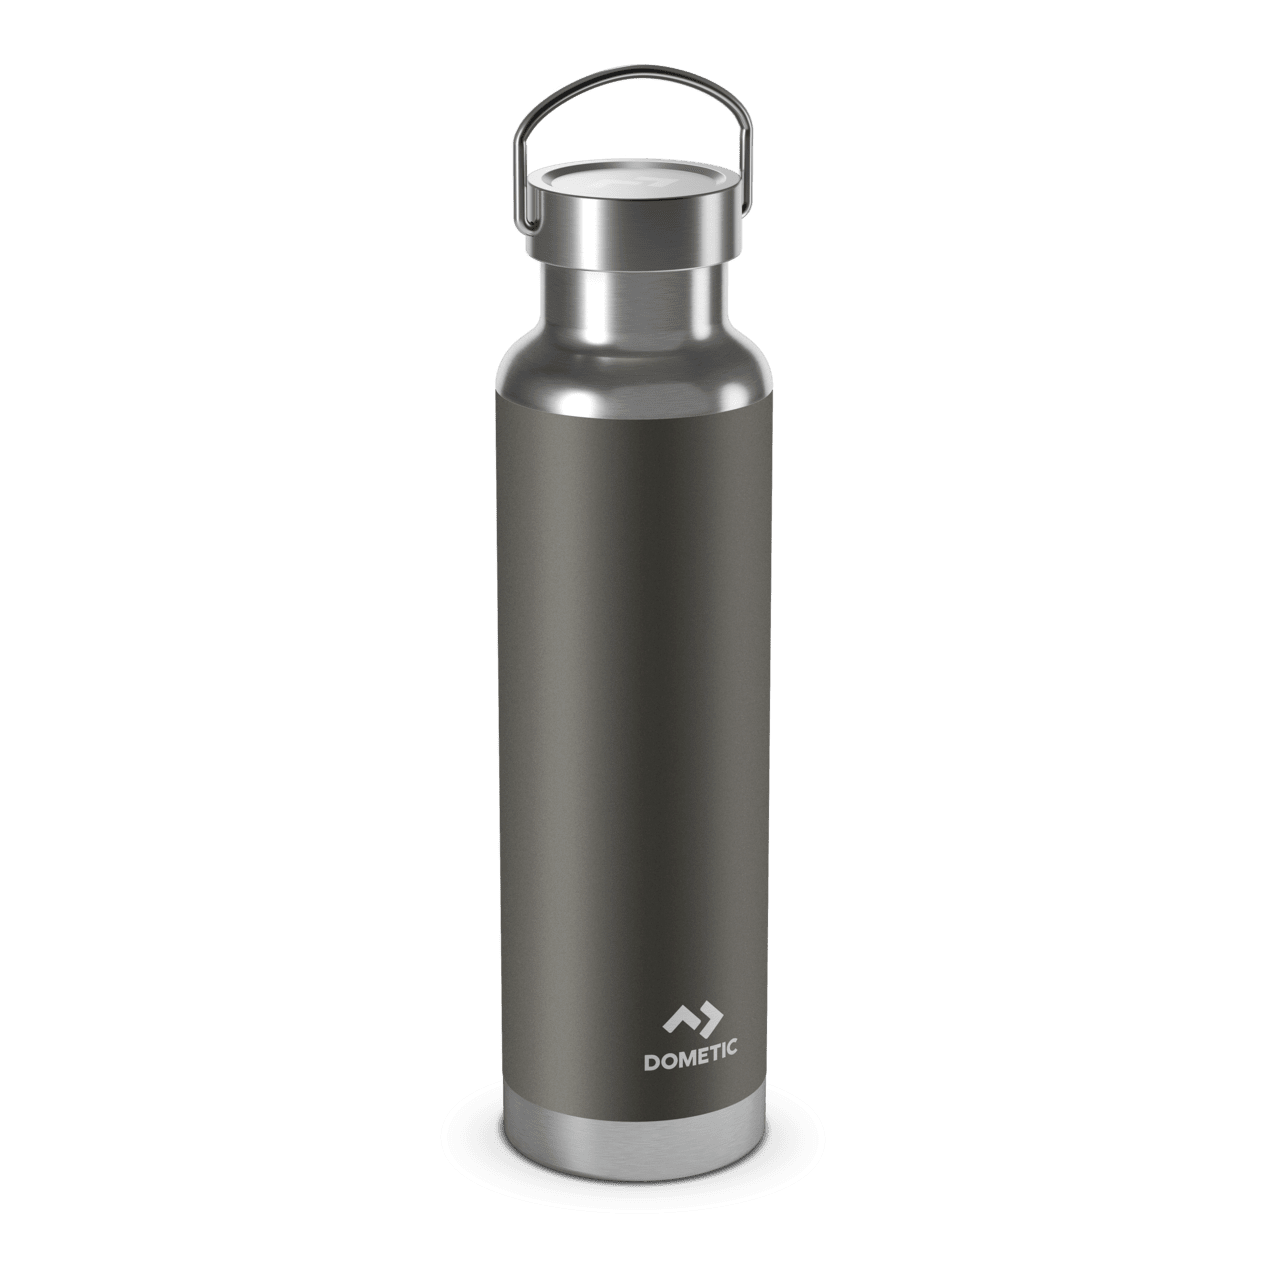 Dometic THRM66 ORE Thermosflasche, 660 ml/22 US fl oz, Erz